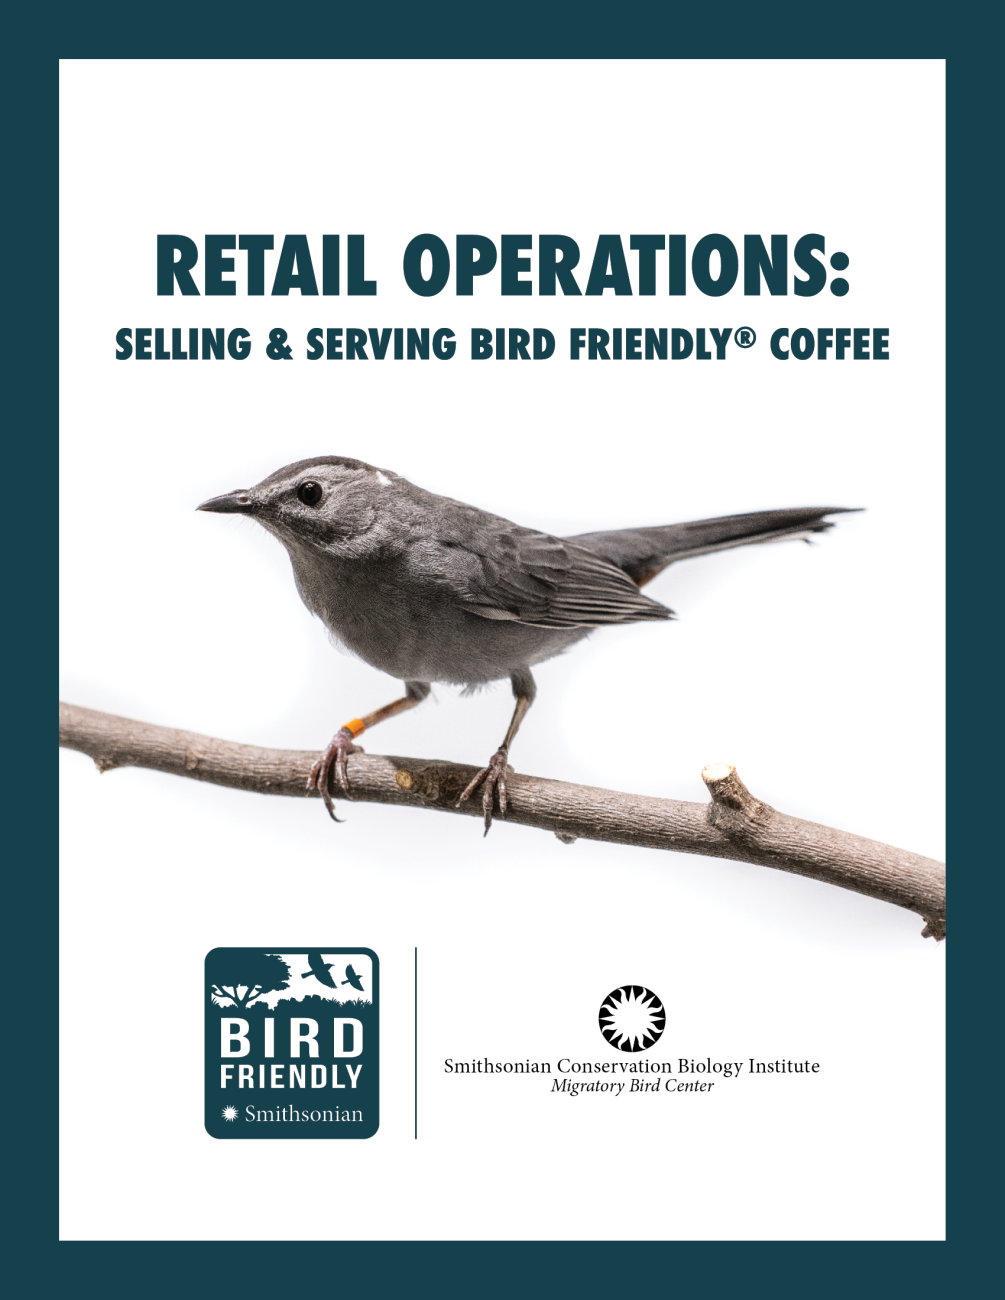 The first page of the retail operations bird friendly toolkit PDF ("Retail Operations: Selling & Serving Bird Friendly Coffee") featuring a gray catbird perched on a branch and the Bird Friendly and Smithsonian Conservation Biology Institute logos